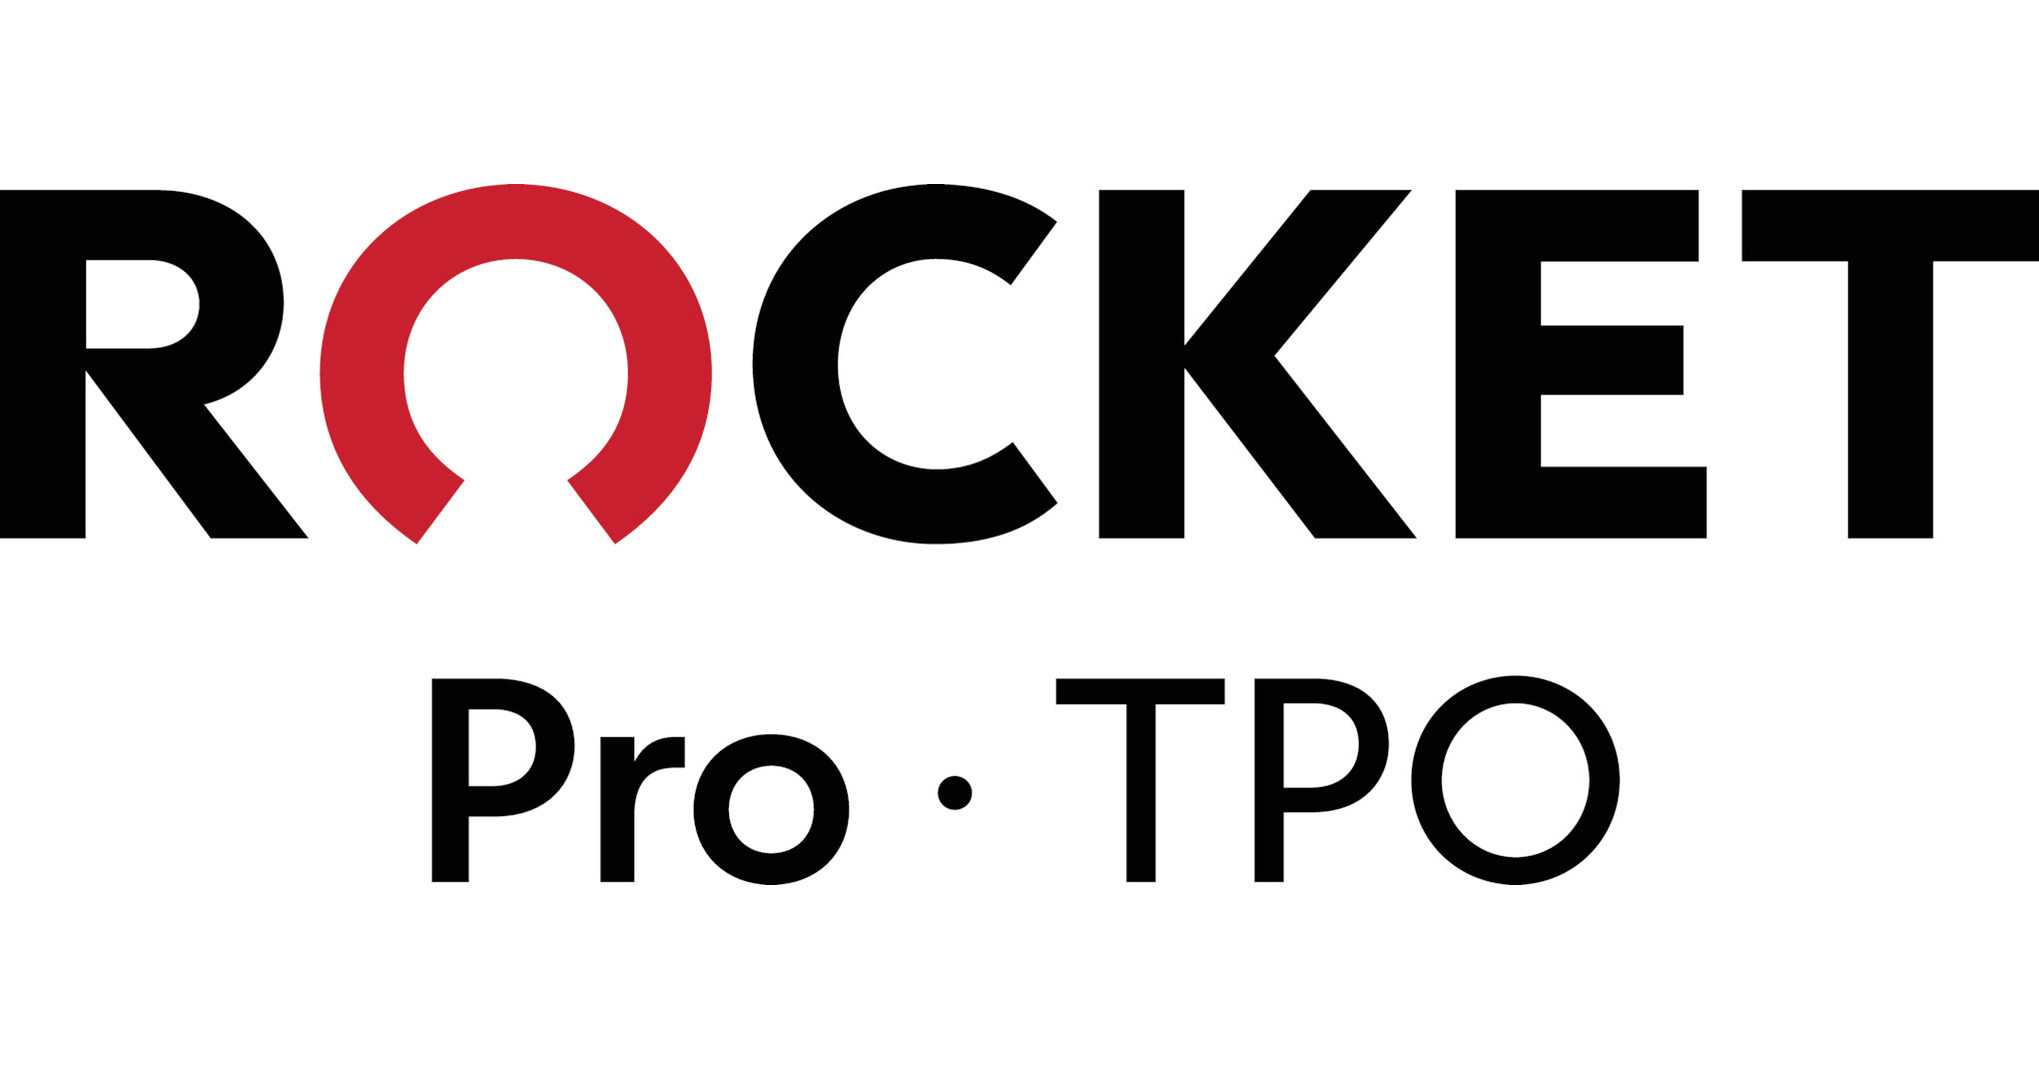 Rocket Pro TPO Gives Correspondent Lenders More Speed, Efficiency and Flexibility with New "Correspondent Assist" Program